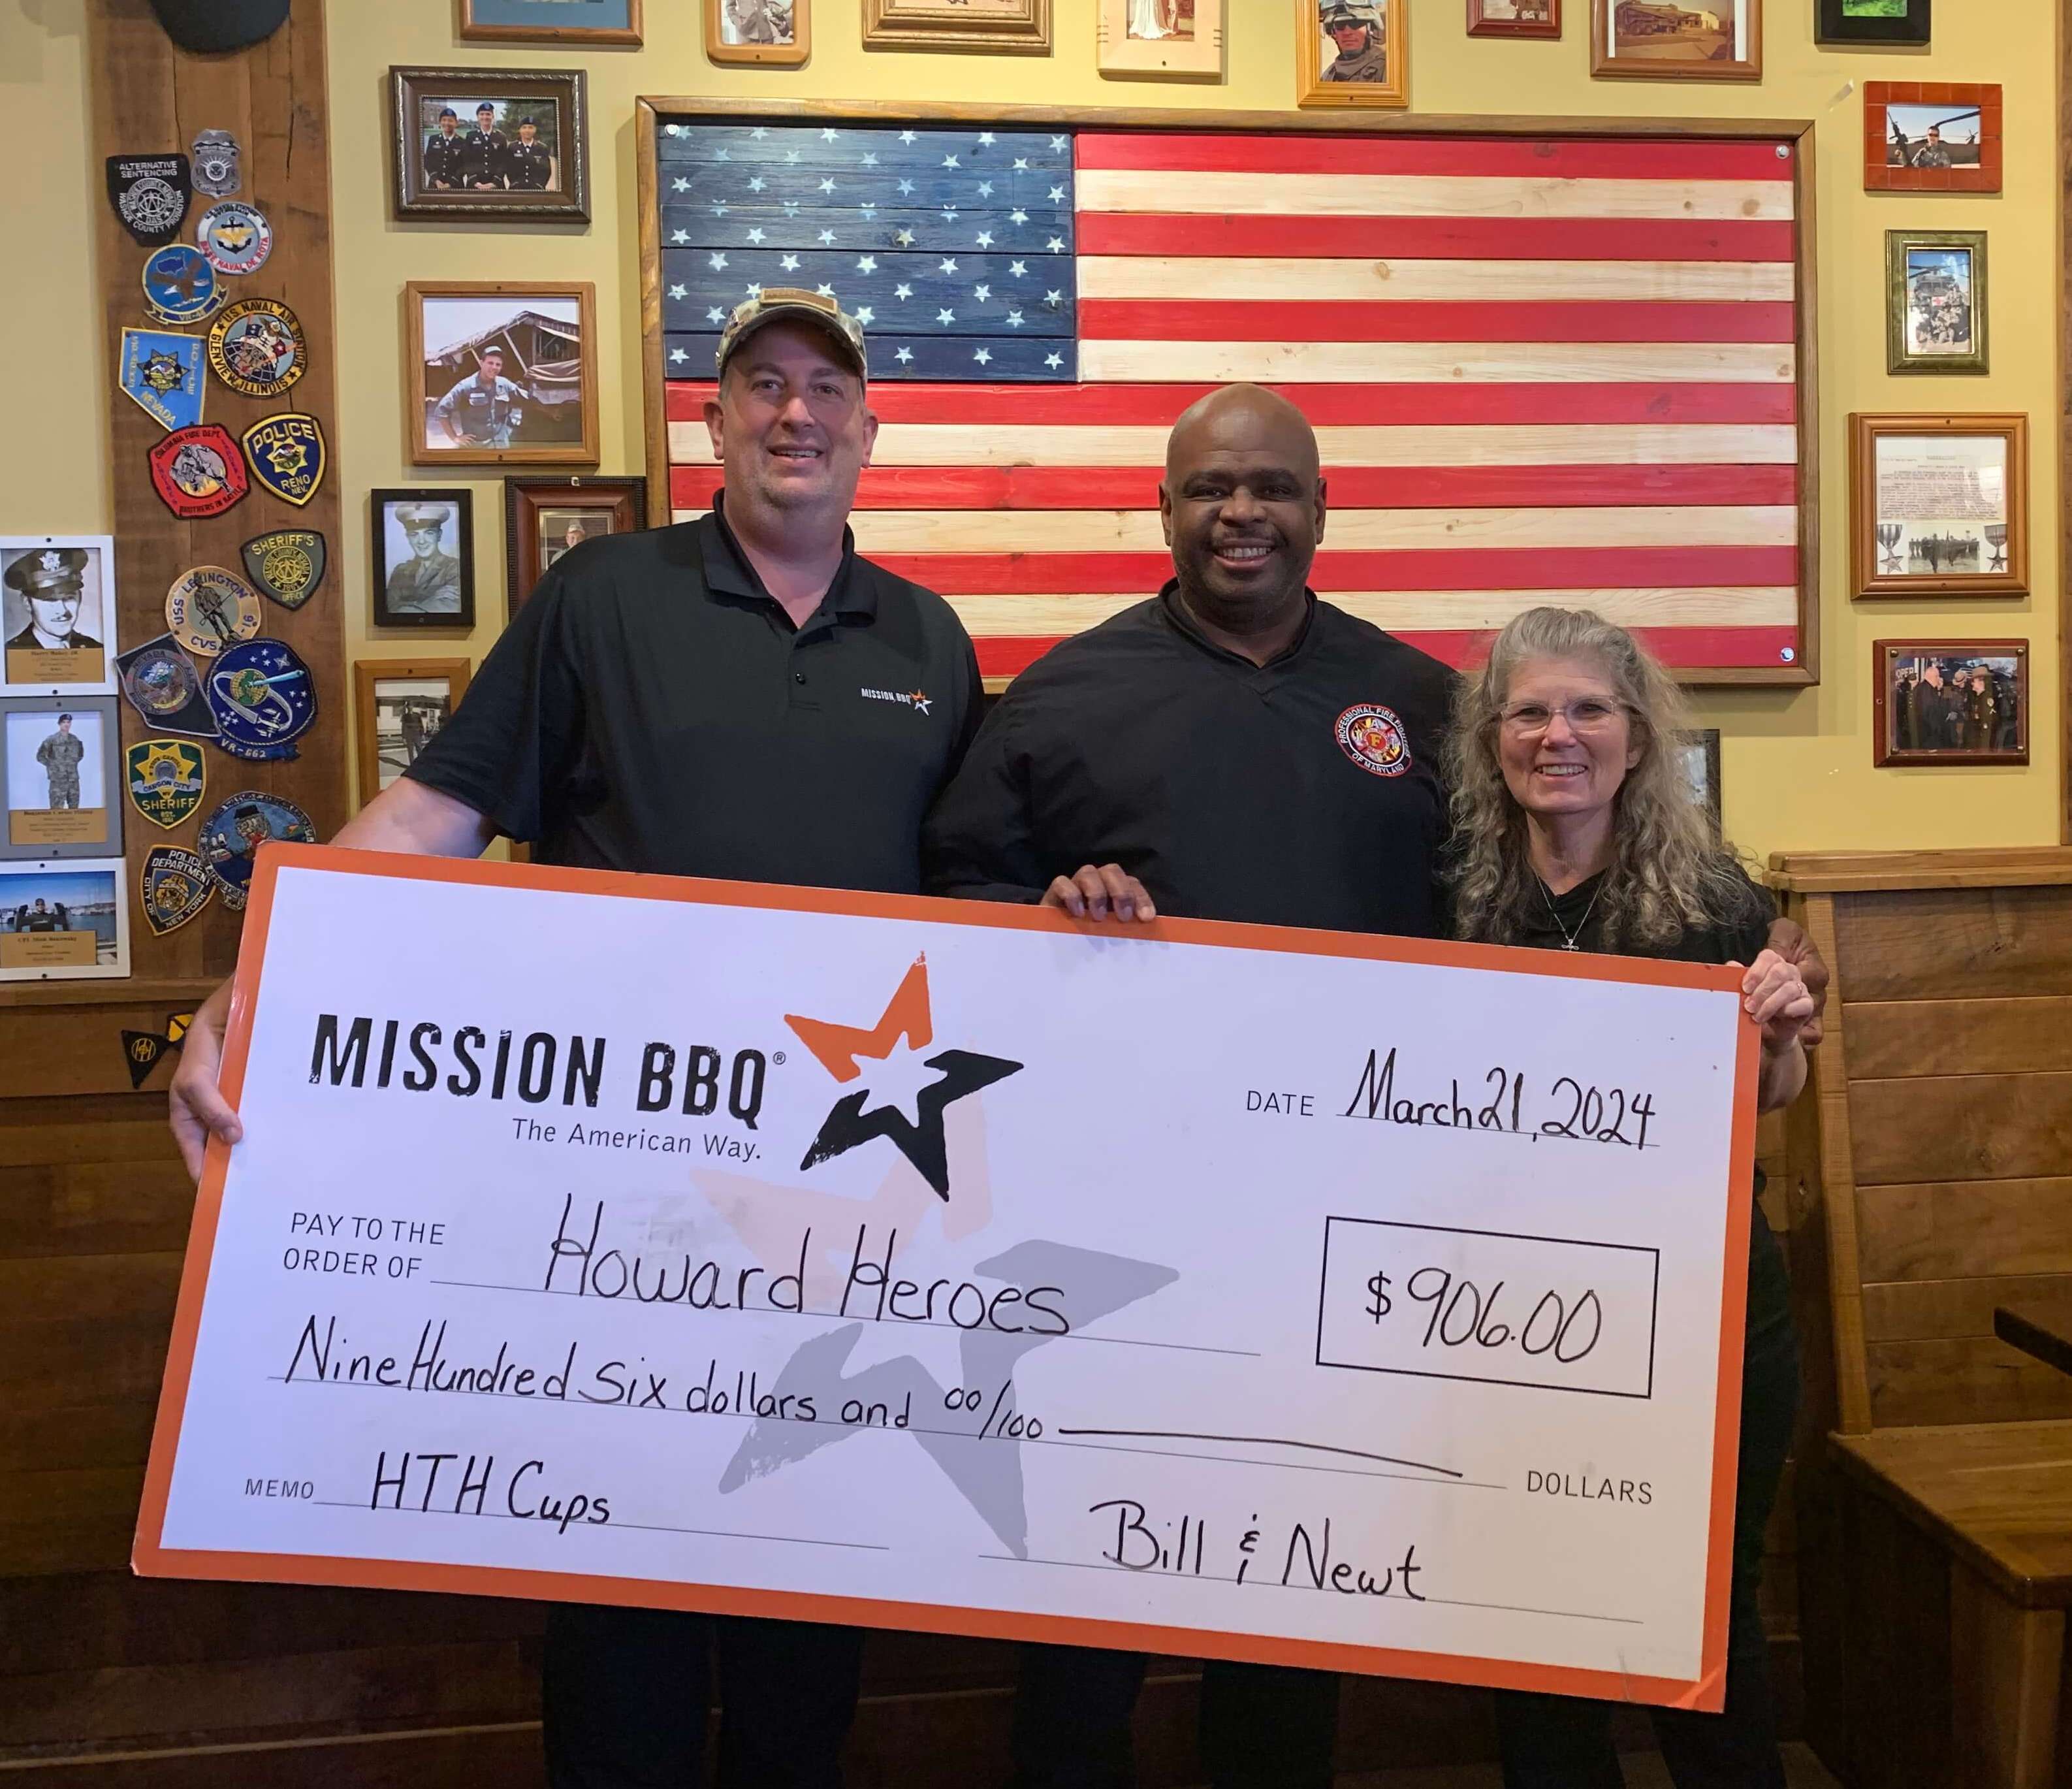 Donation image from Mission BBQ